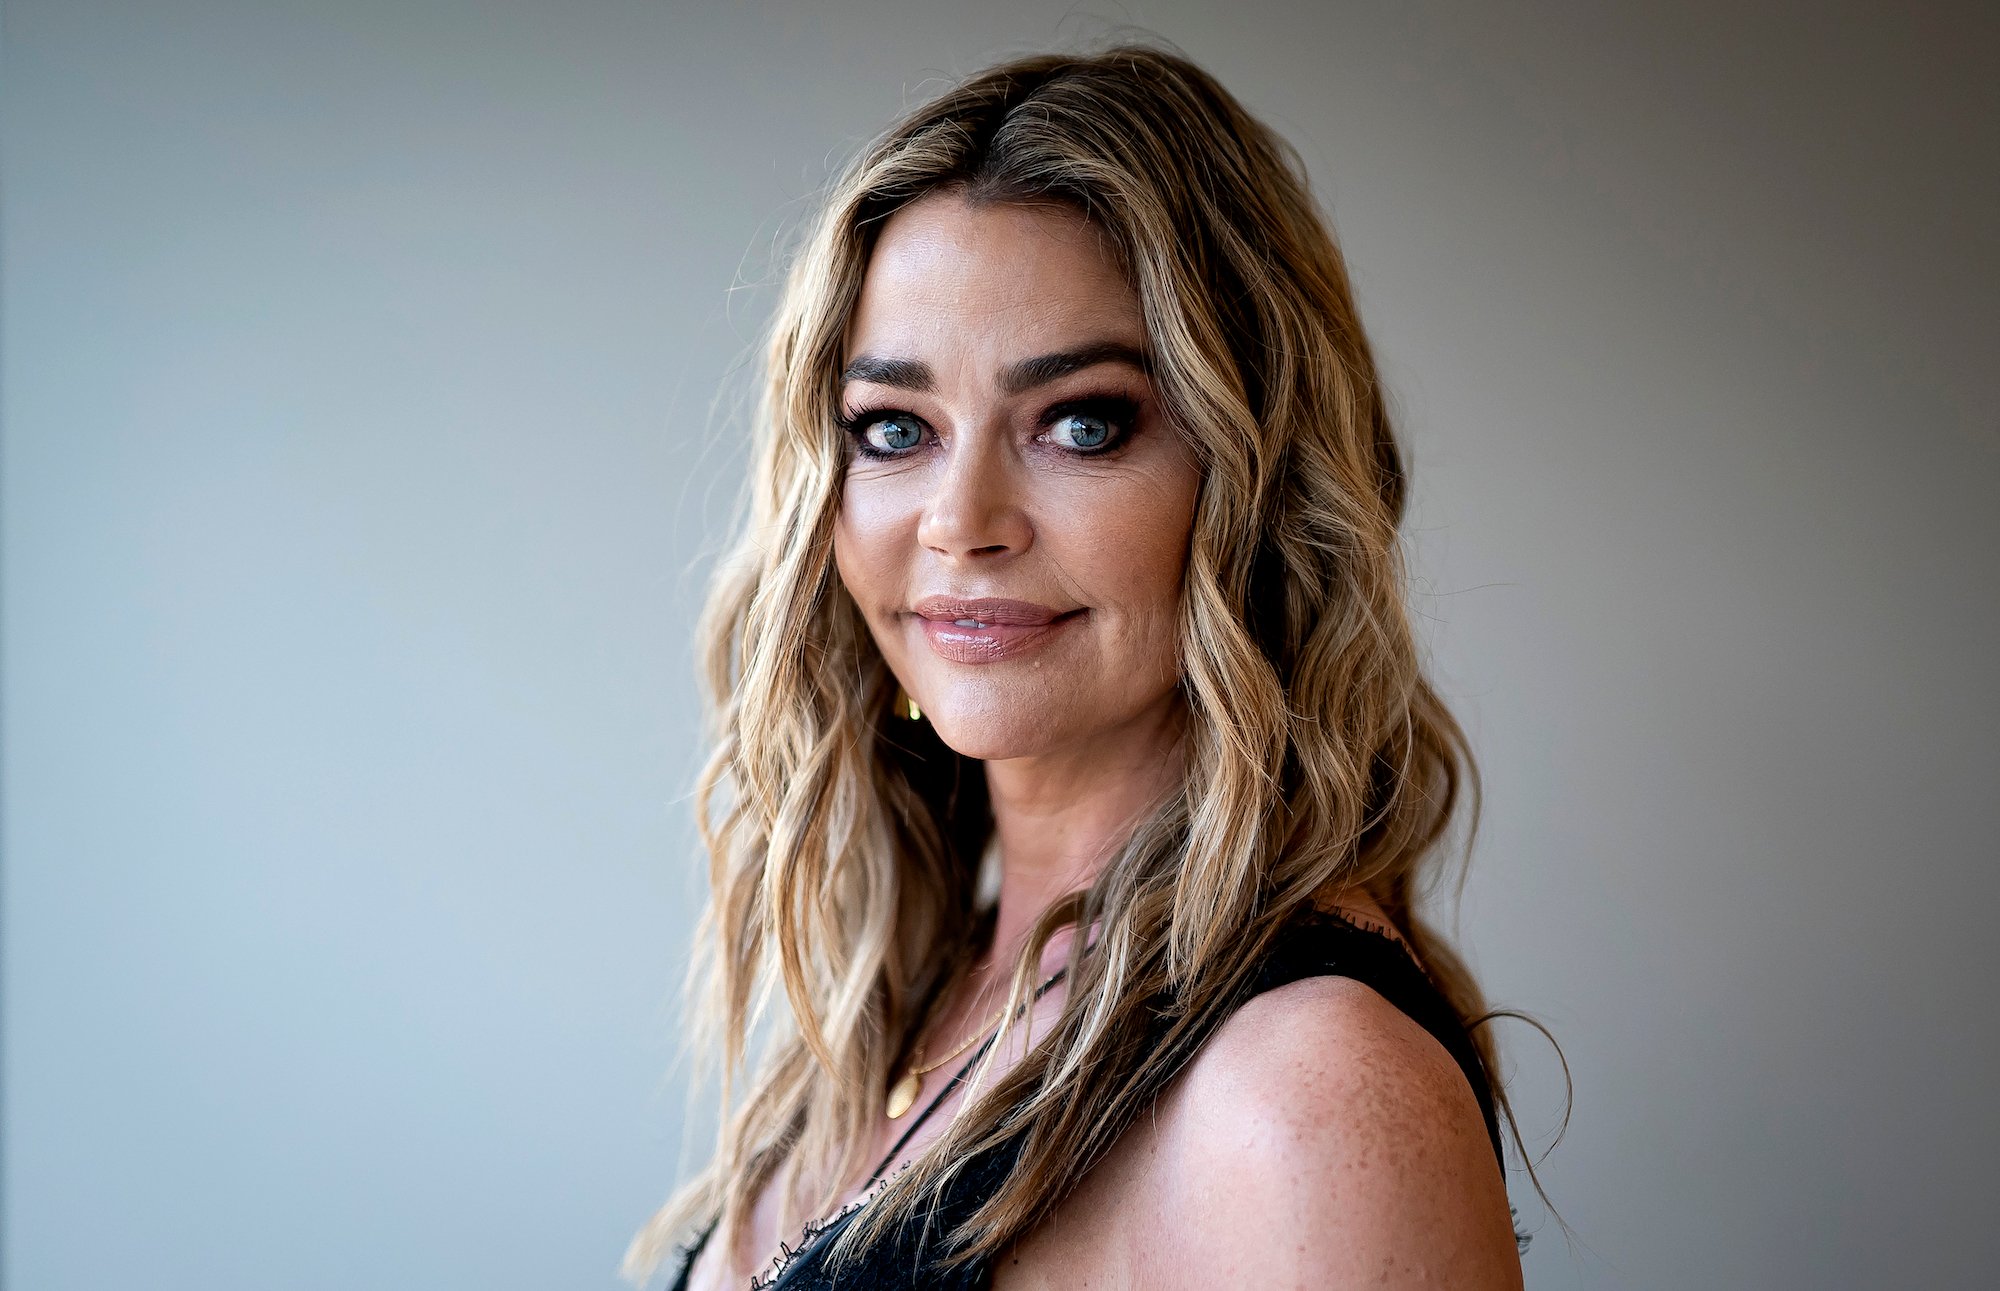 Denise Richards smiling at the camera, turned to the side